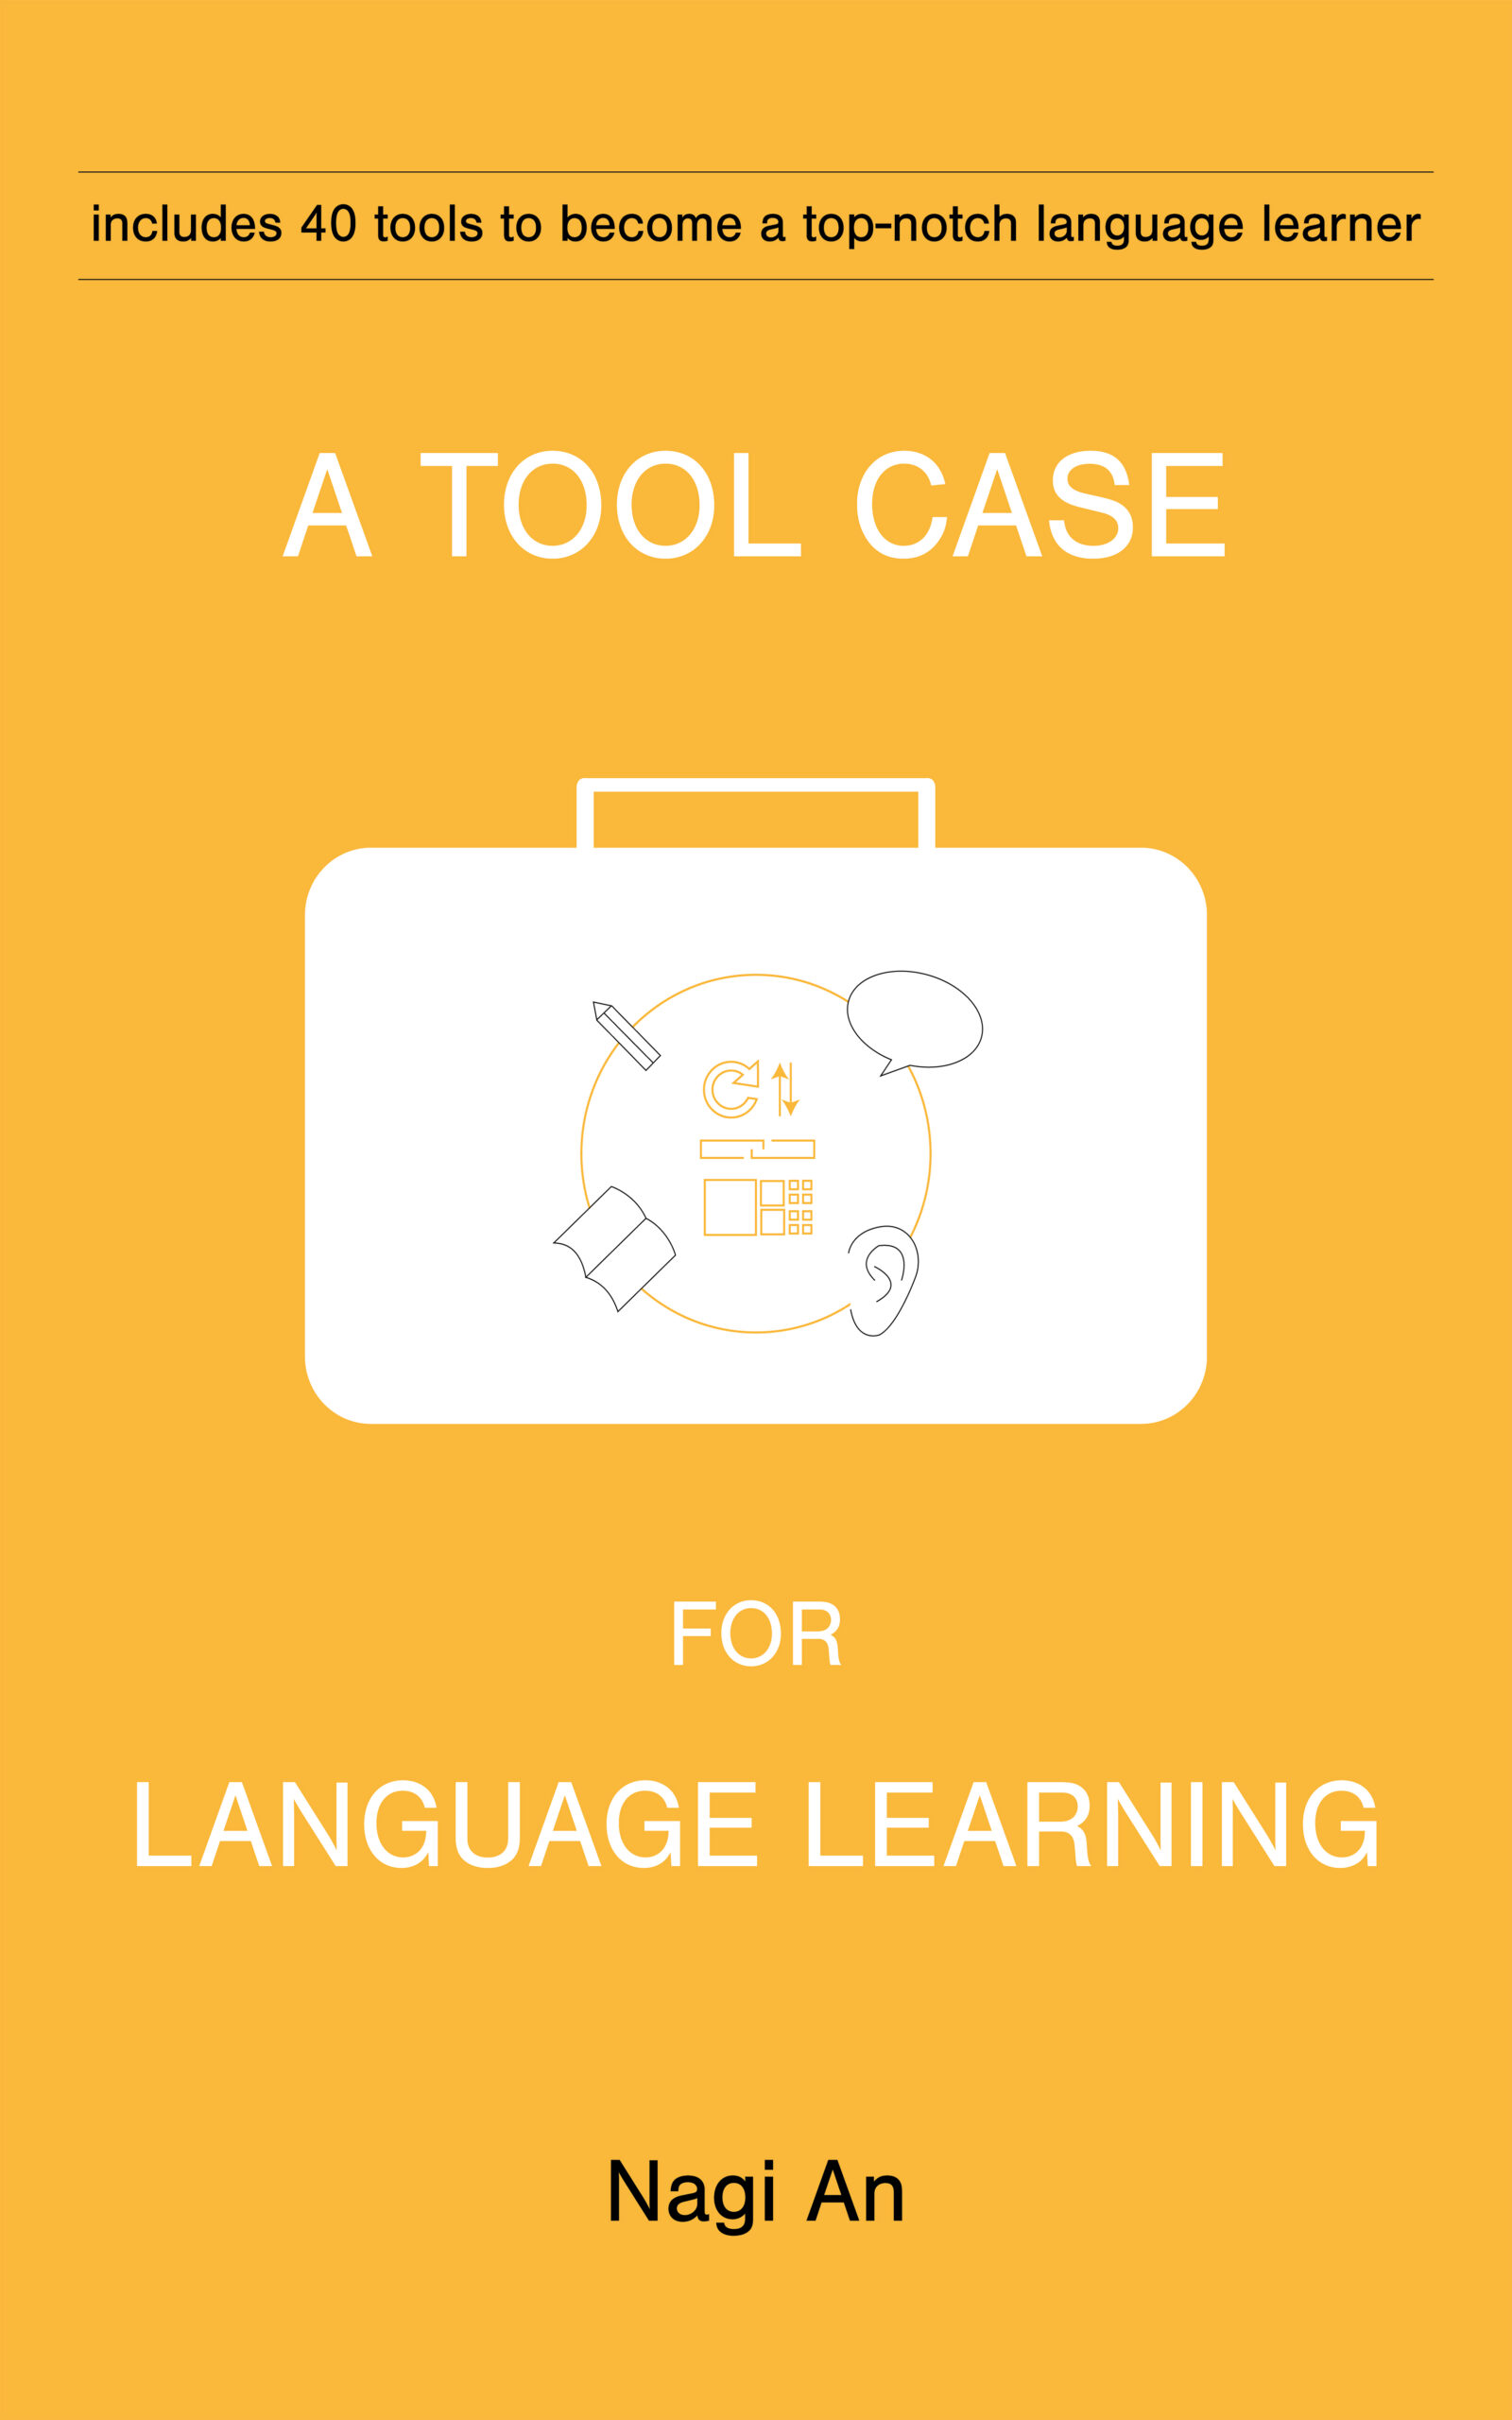 A Tool Case For Language Learning: 40 tools to become a top-notch language learner